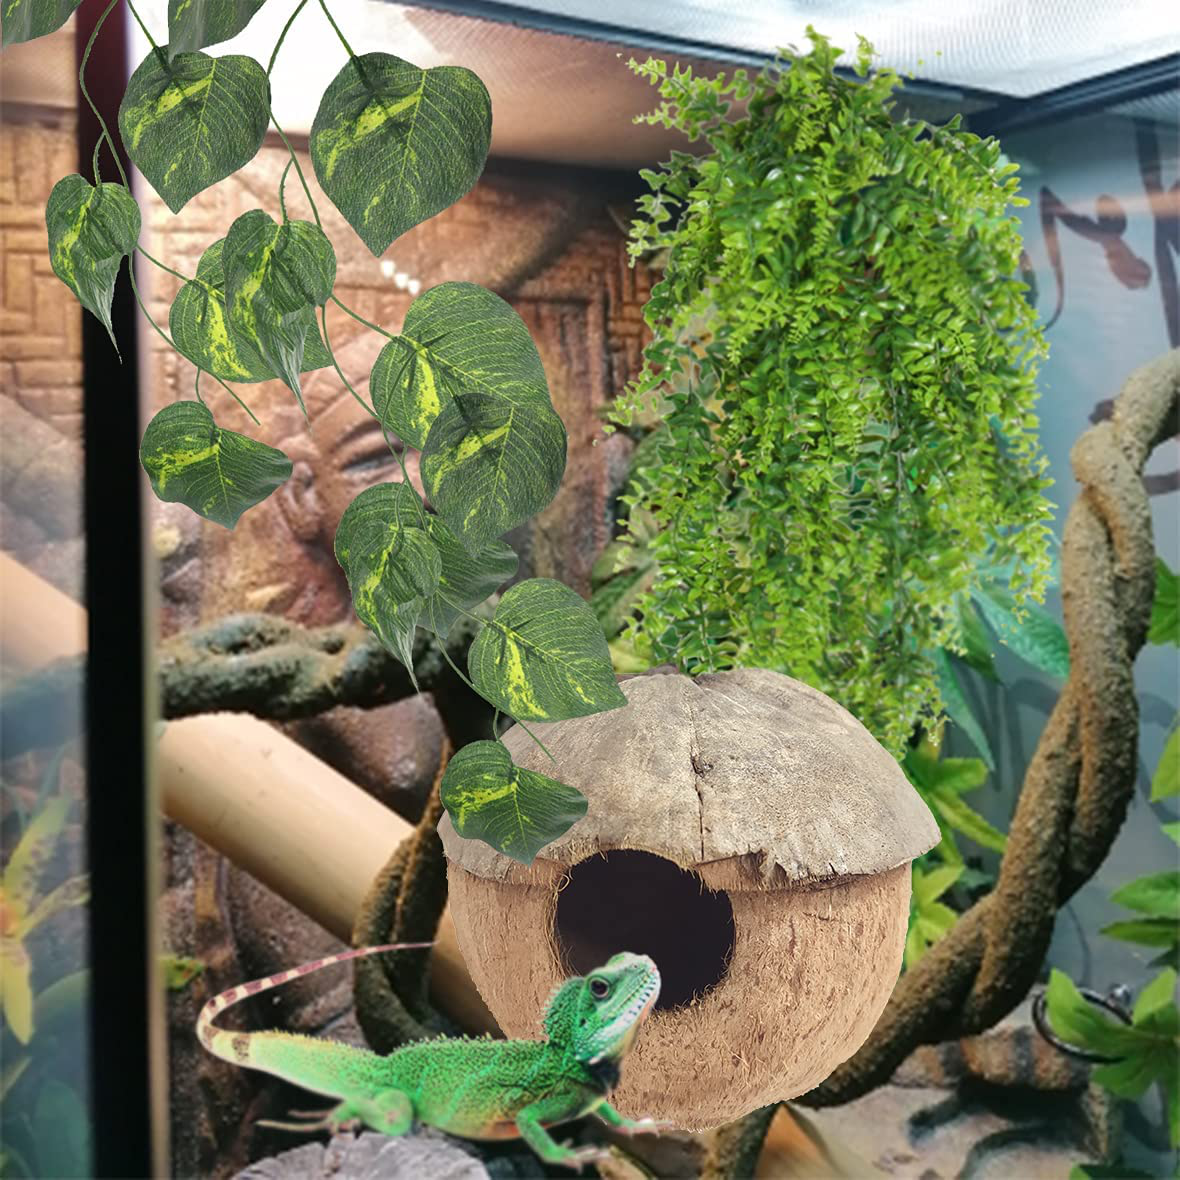 PINVNBY Reptile Coconut Hideout Lizard Coconut Hut Reptile Habitat Decoration with Artificial Bendable Vines Green Plants and Leaves Gecko Tank Accessories for Chameleon Bearded Dragons Snakes Animals & Pet Supplies > Pet Supplies > Reptile & Amphibian Supplies > Reptile & Amphibian Habitats PINVNBY   